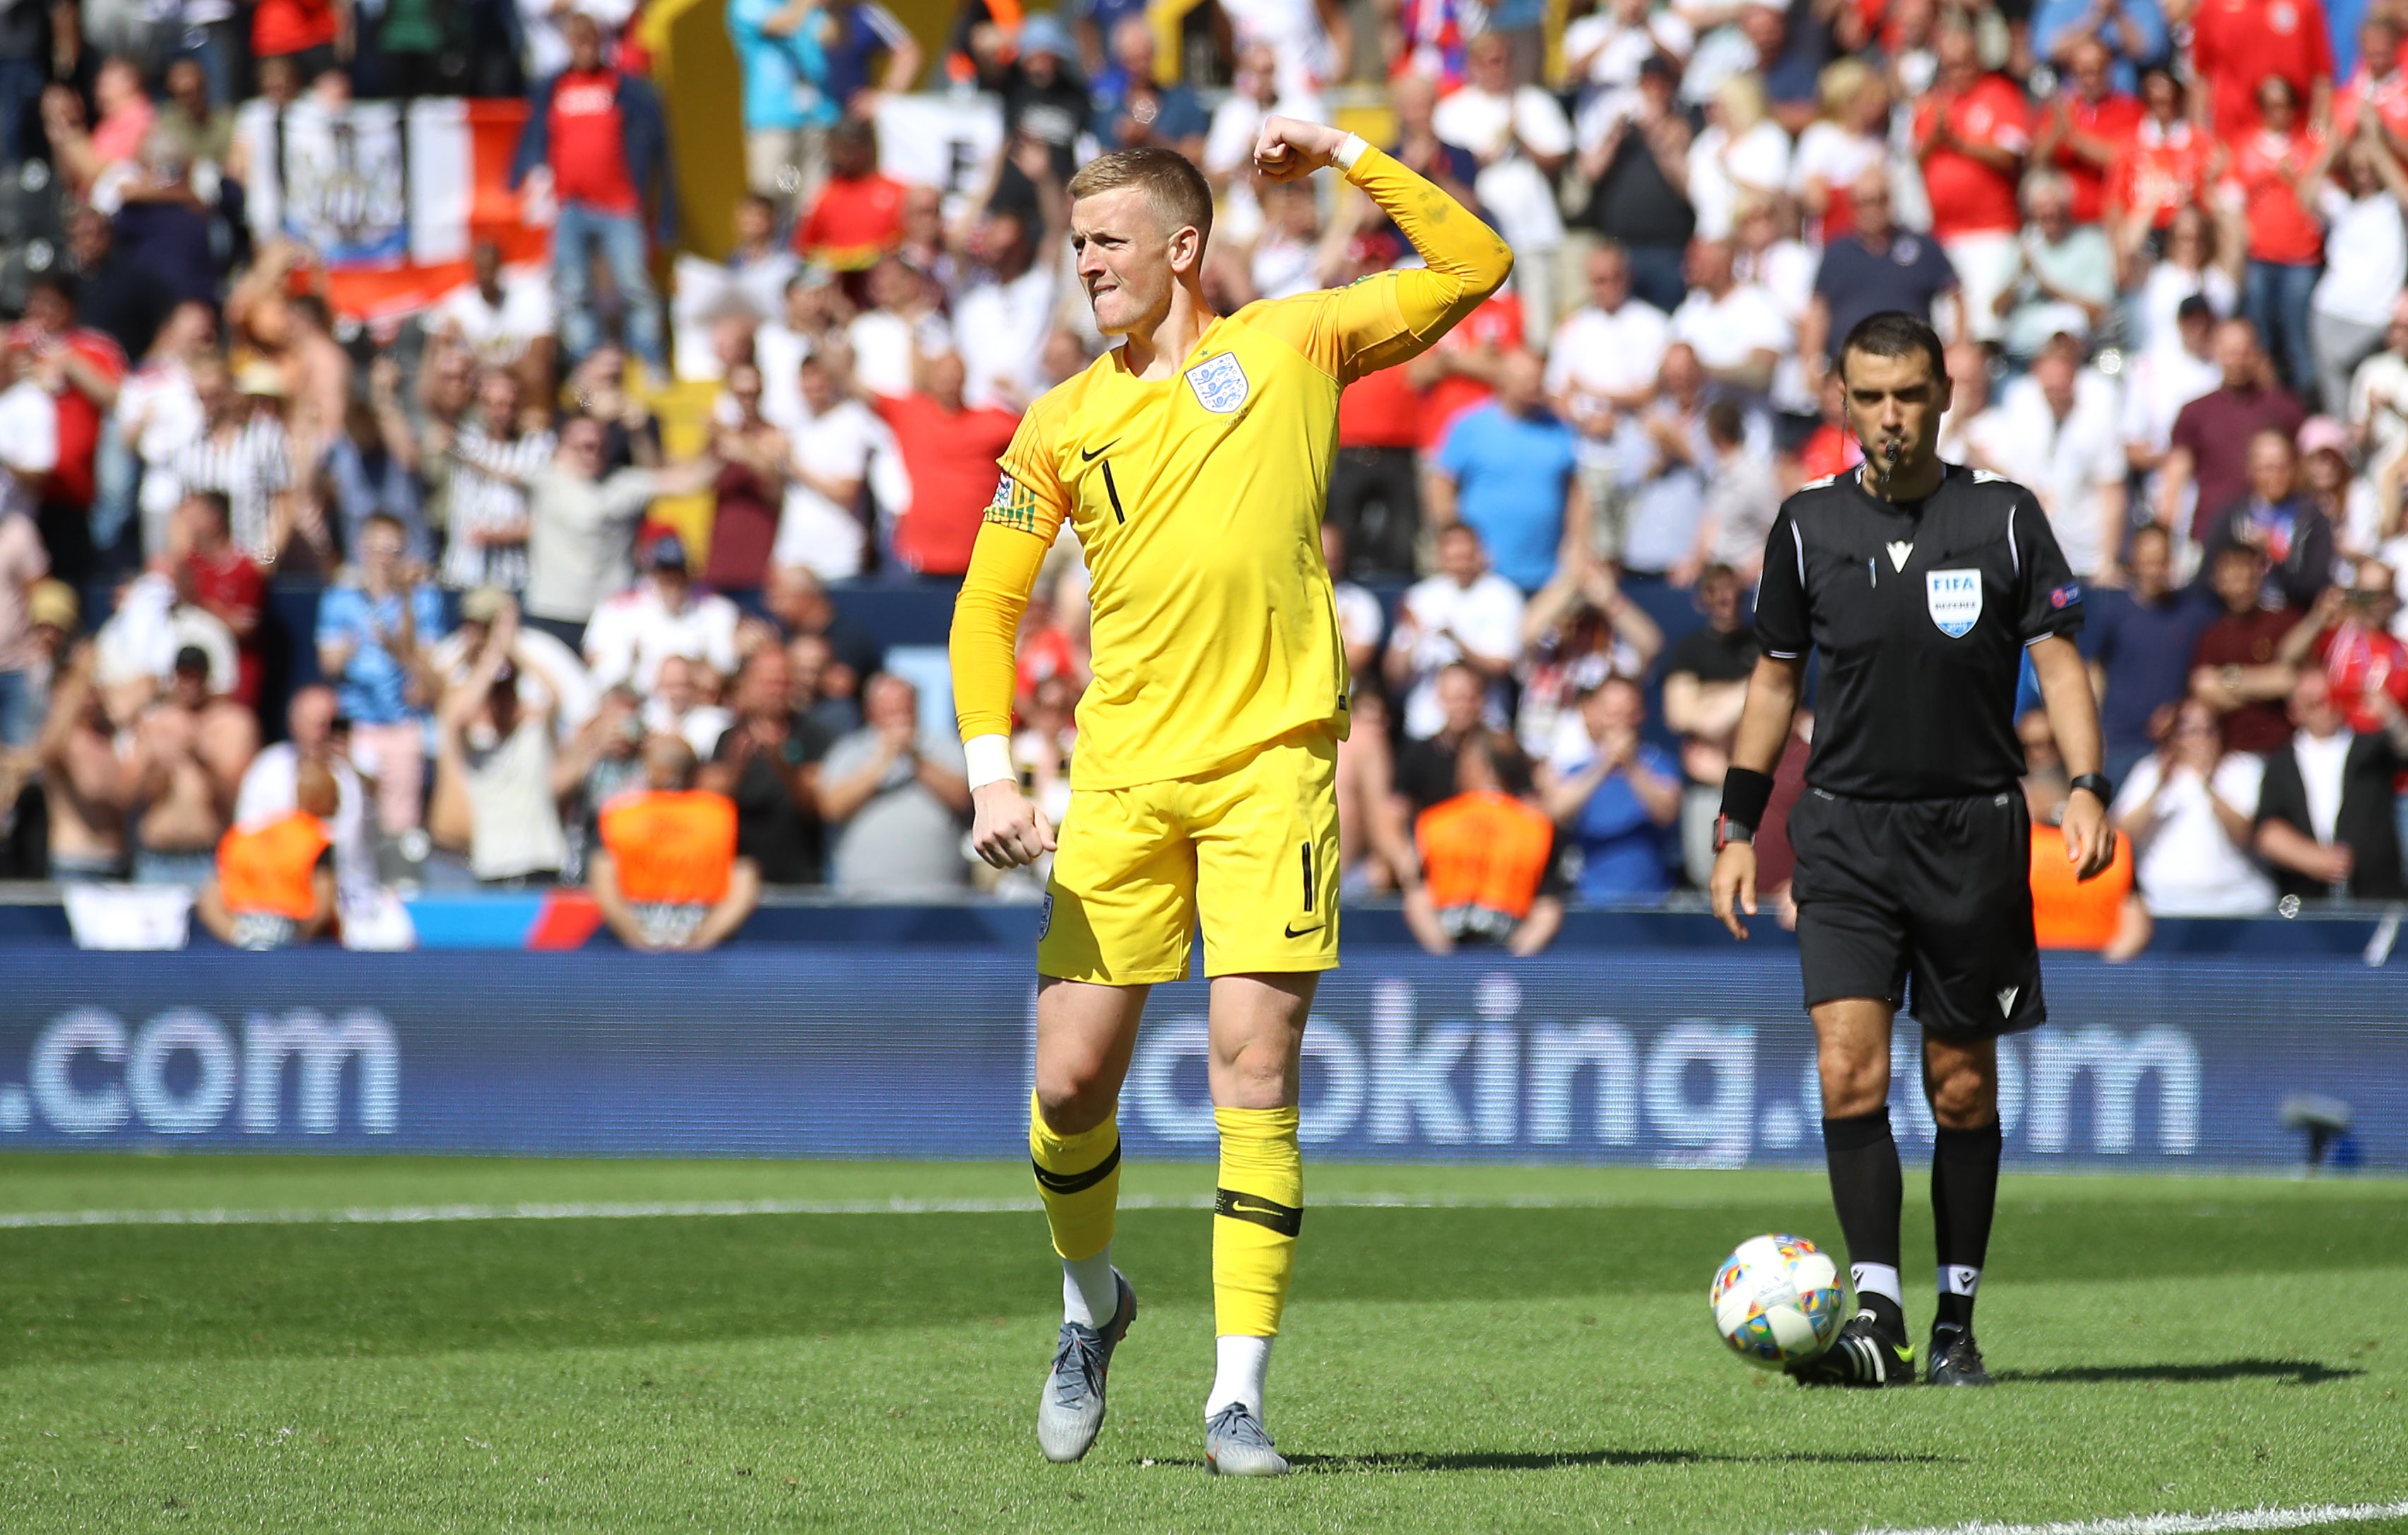 England goalkeeper Jordan Pickford enjoyed scoring his penalty during the Nations League shoot-out win over Switzerland in Guimaraes (PA)